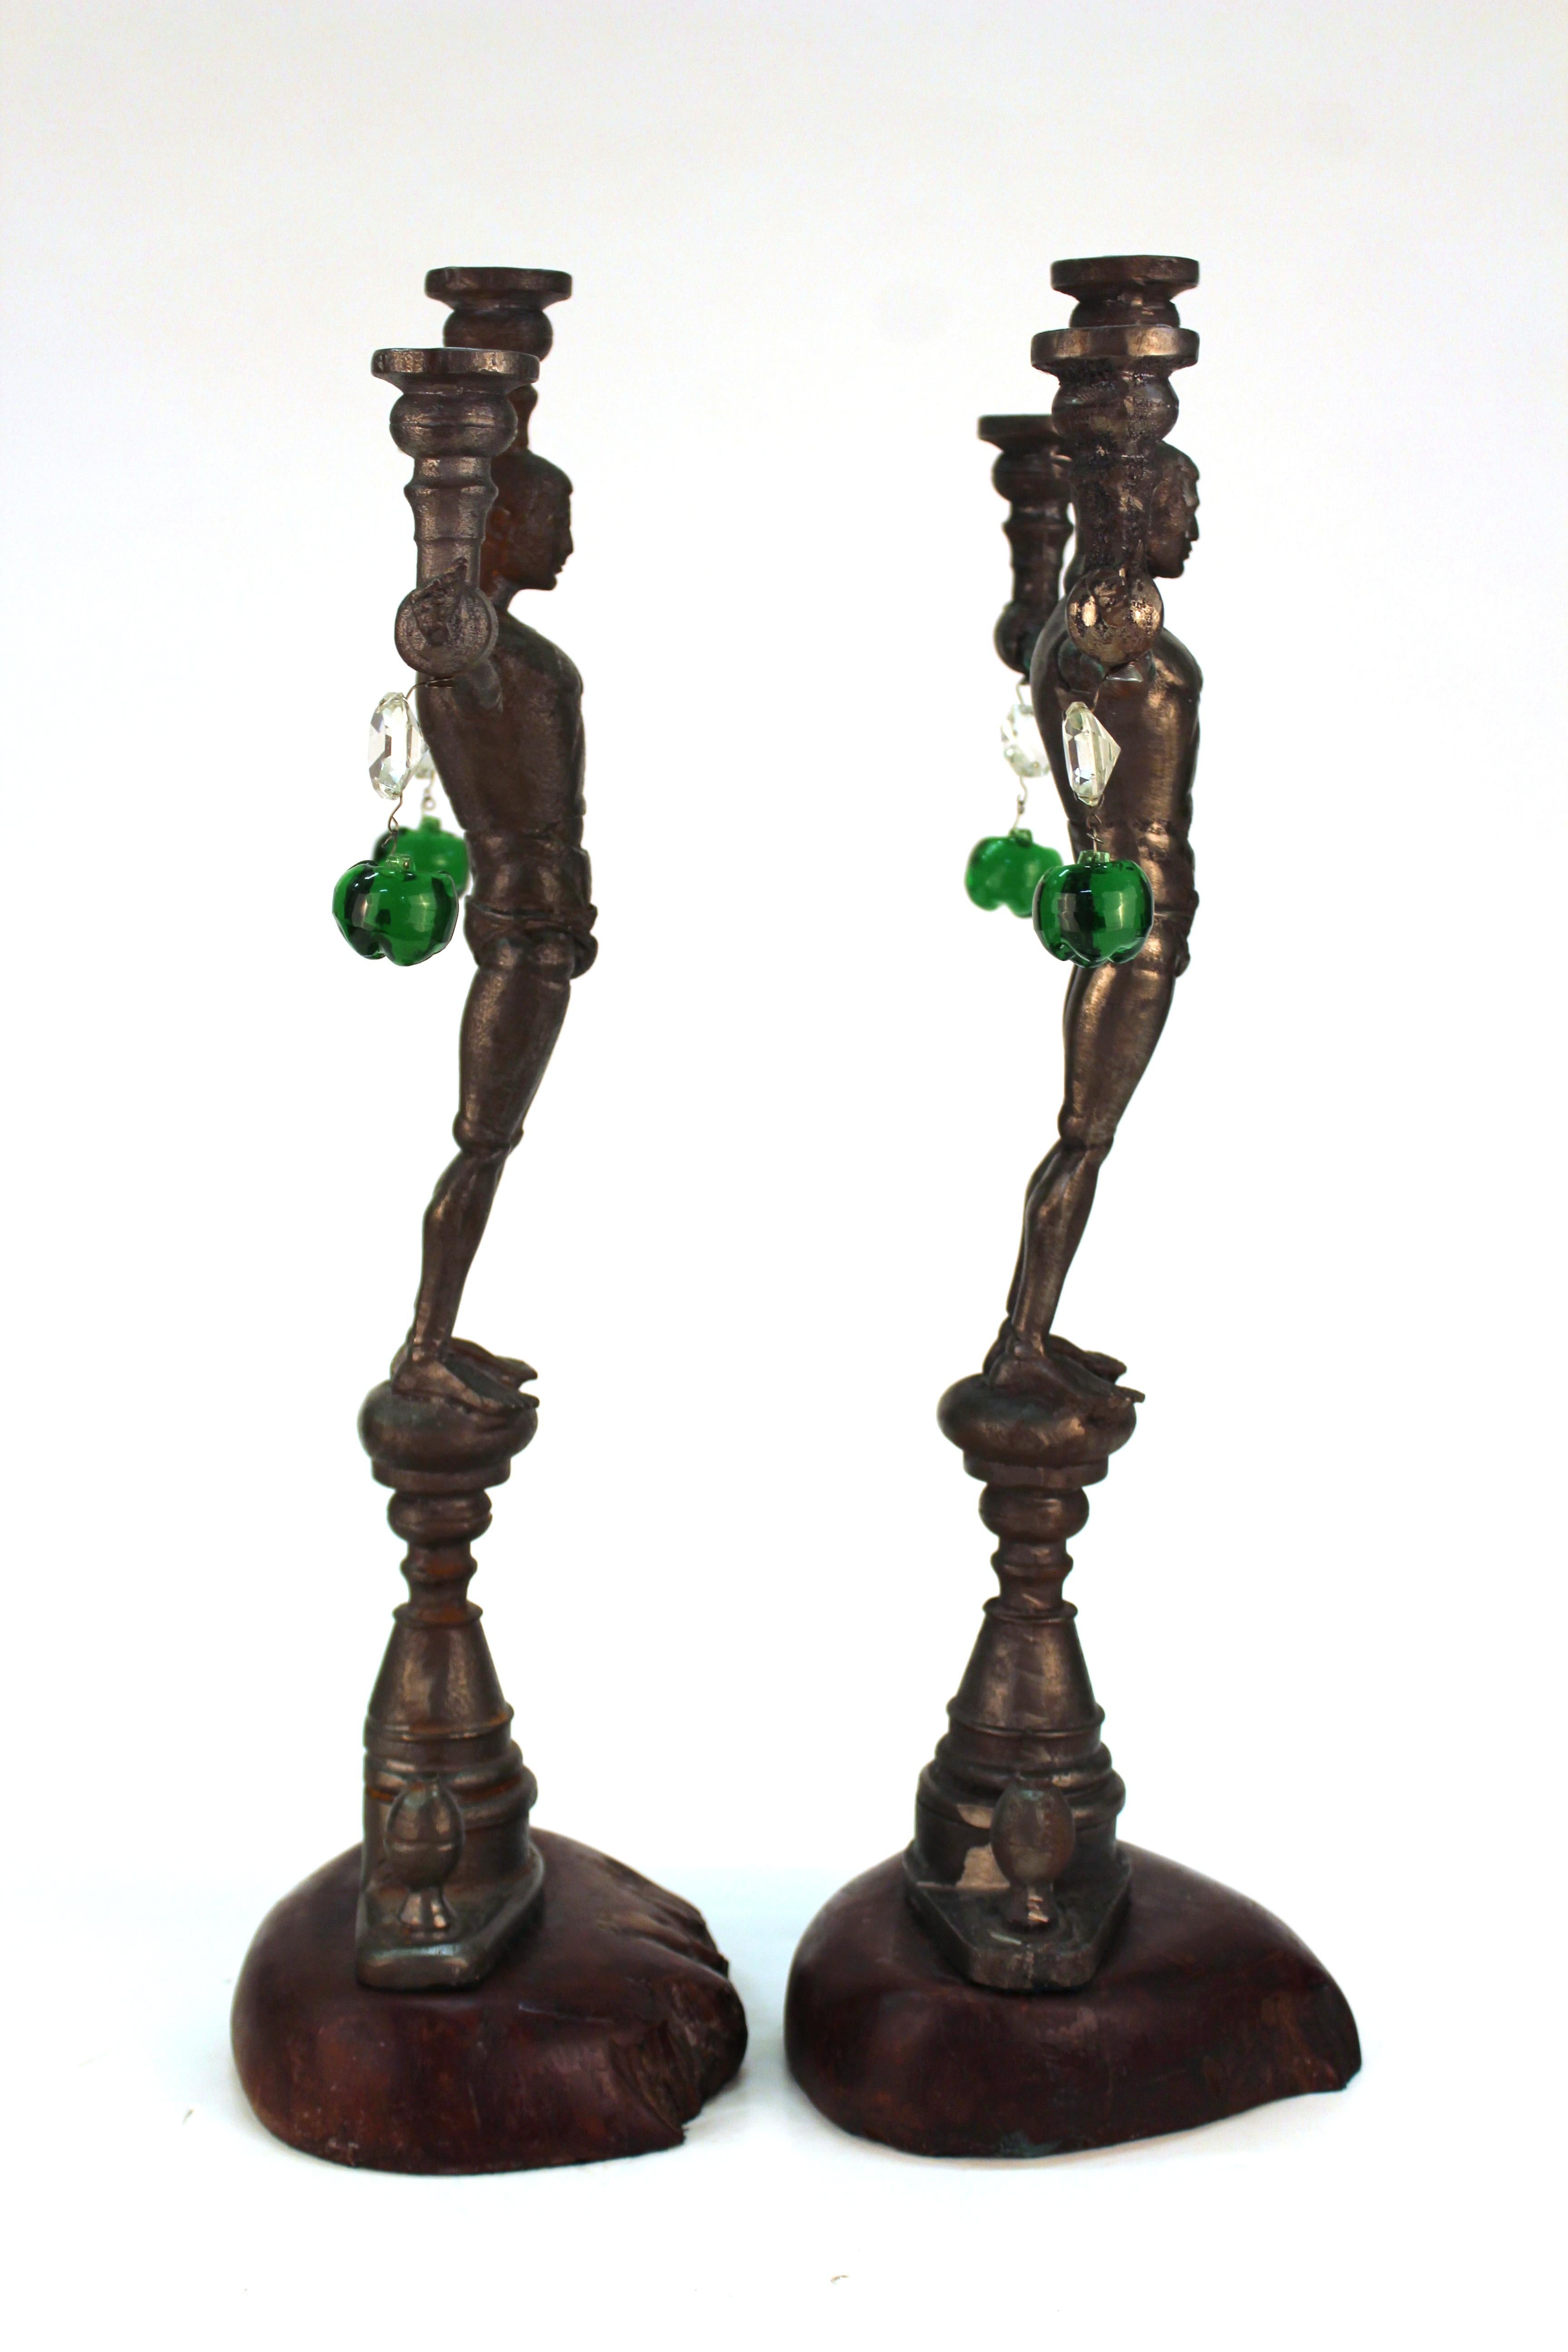 A pair of cast iron candelabras in the shape of G.I. Joe action figures in the nude with stretched out arms, created by California artist Joel Otterson (b. 1959) in circa 1992. The pair has hanging lead crystal elements and is affixed to wood bases.